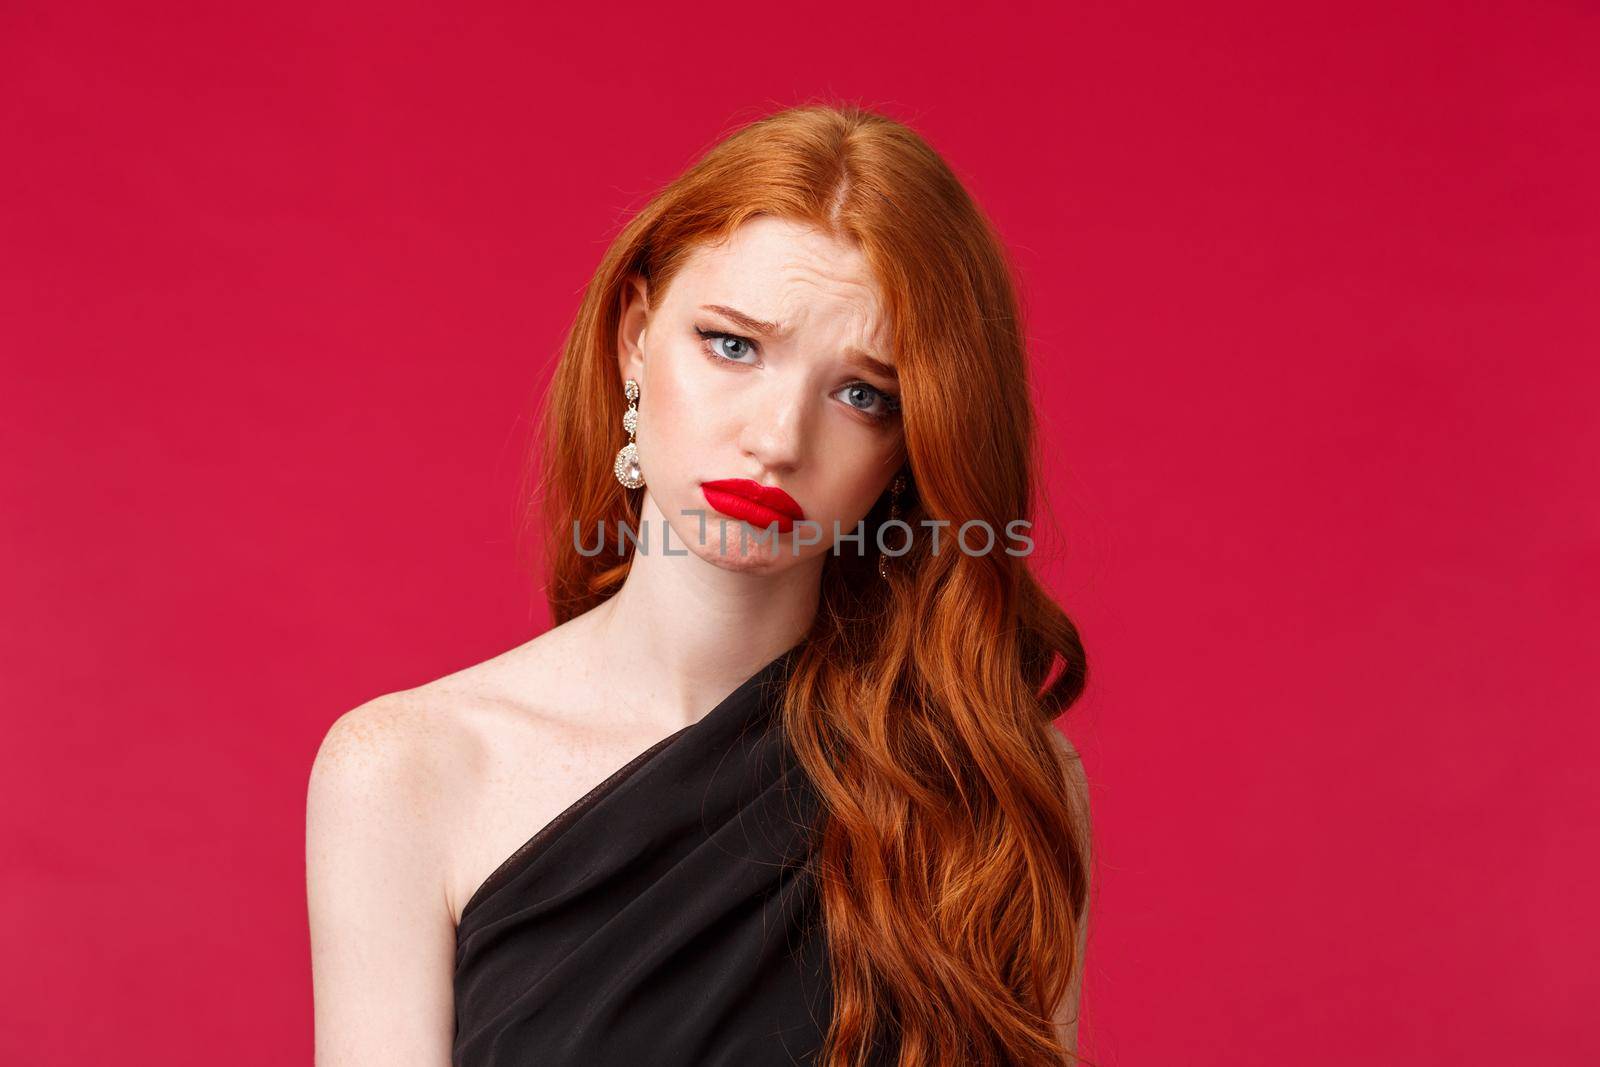 Close-up portrait of gloomy and upset young redhead woman in red lip gloss, black evening dress, want to cry but have makeup on, look sadness and distress, feel let down, stand red background.